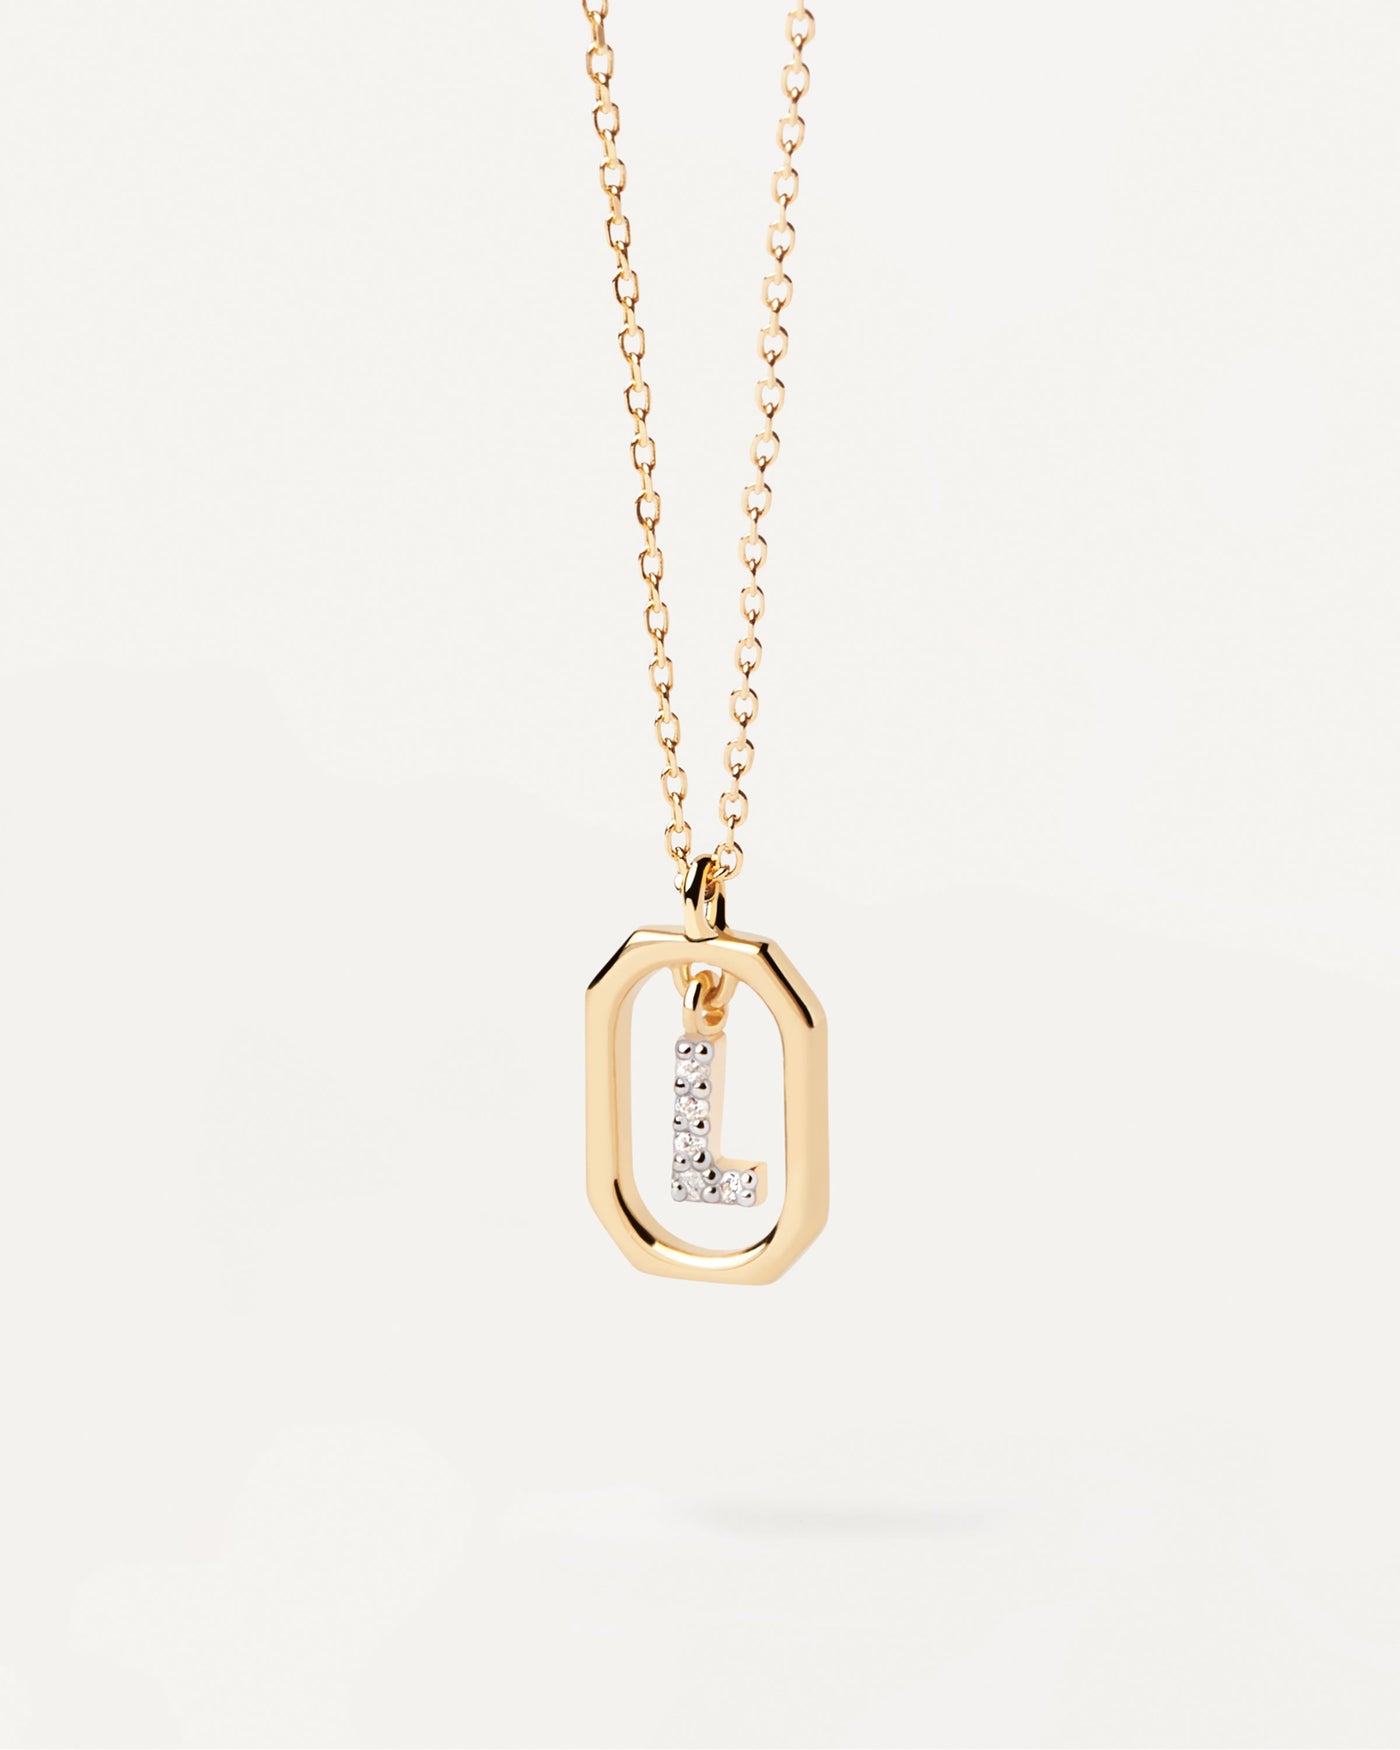 2023 Selection | Mini Letter L Necklace. Small initial L necklace in zirconia inside gold-plated silver octagonal pendant. Get the latest arrival from PDPAOLA. Place your order safely and get this Best Seller. Free Shipping.